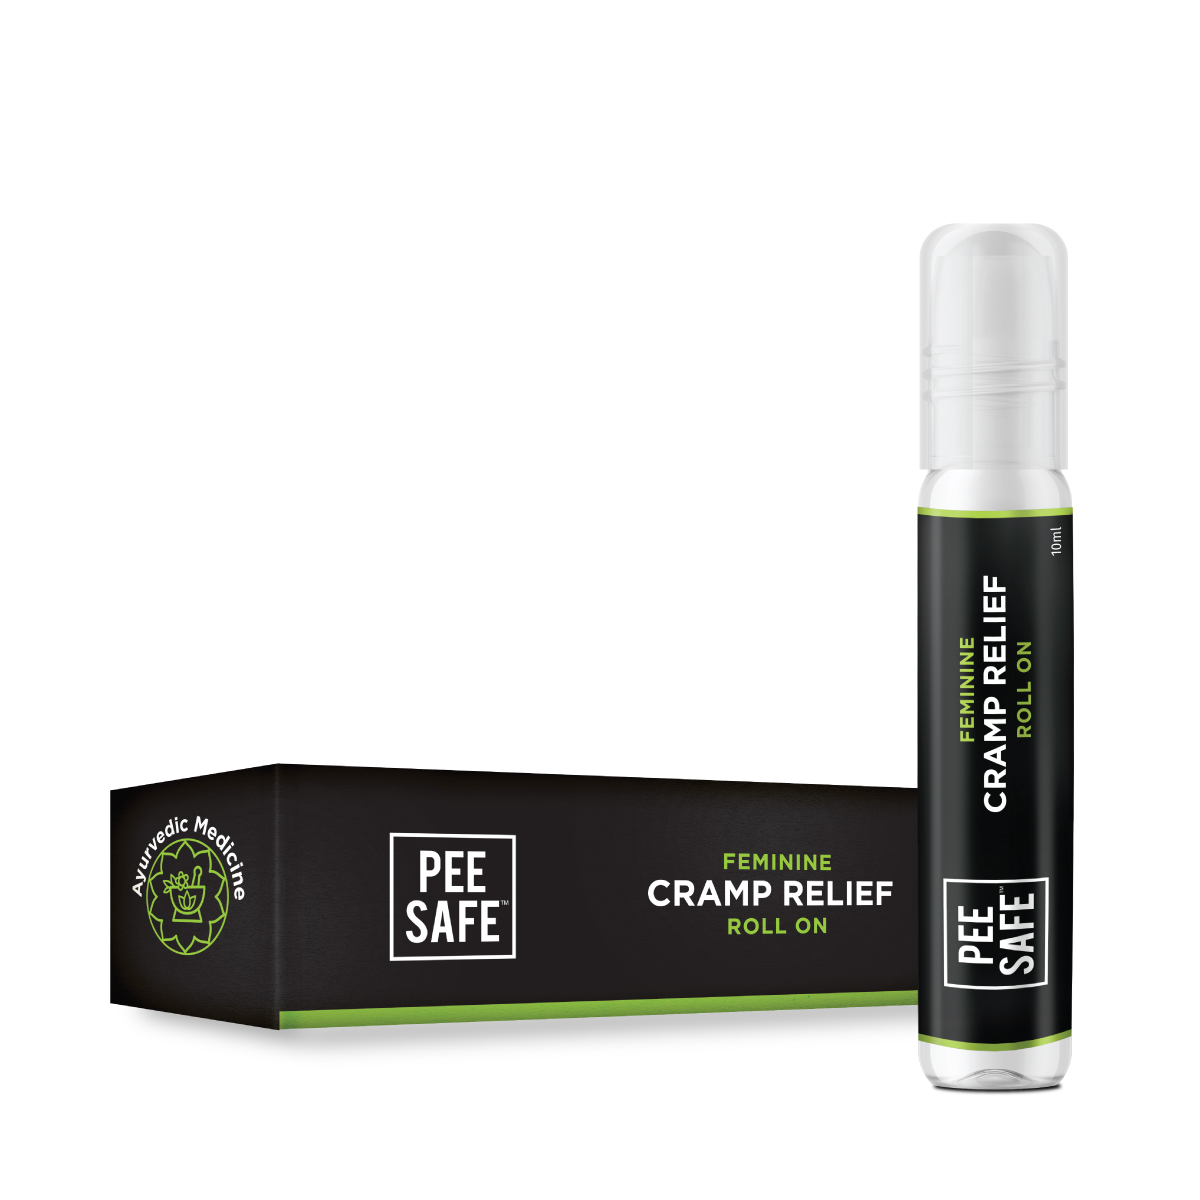 Pee Safe Feminine Cramp Relief Roll On For Period Pain - 10 Ml 